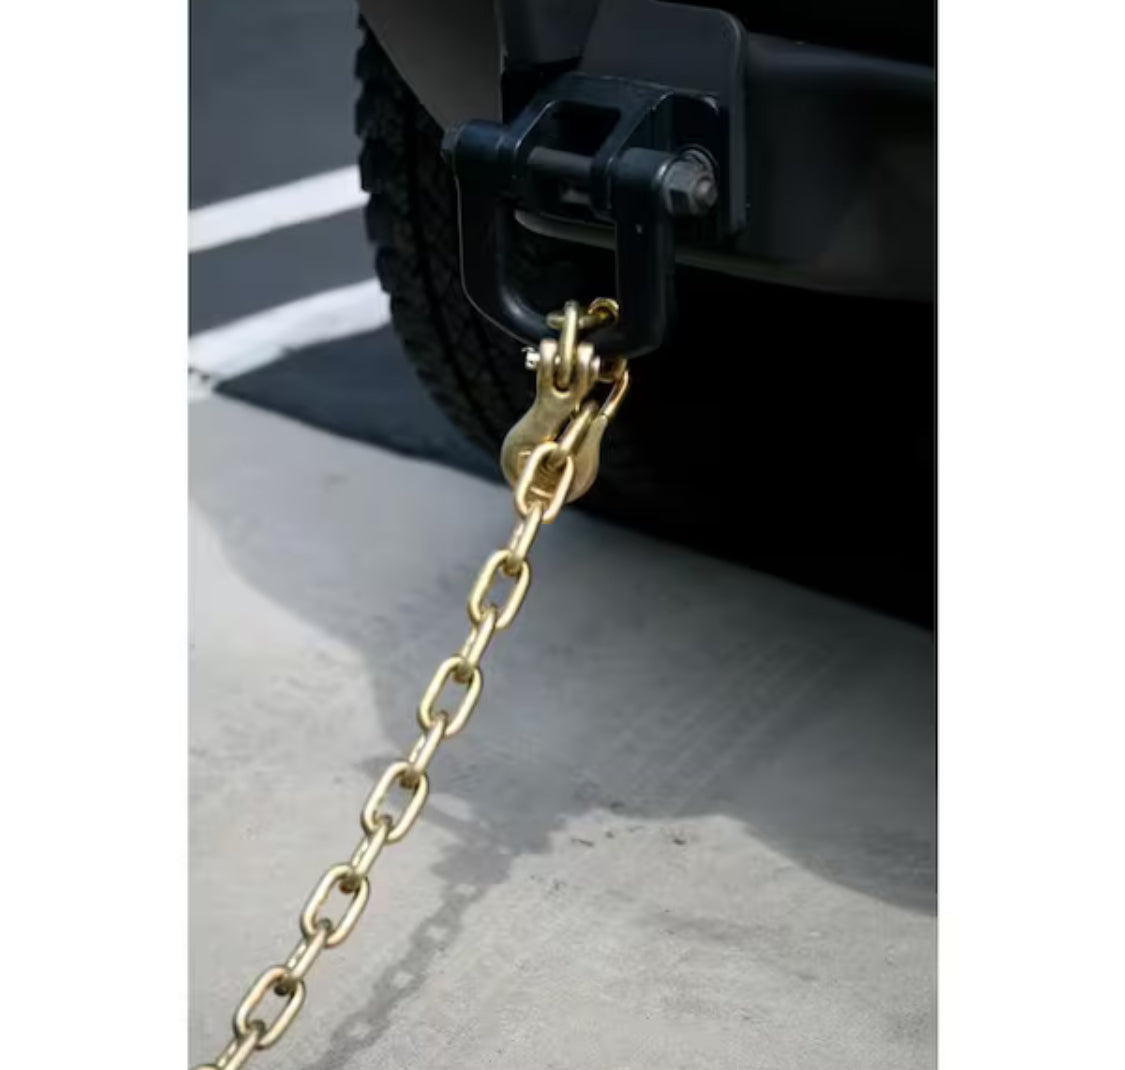 Everbilt 5/16 in. x 20 ft. Grade 70 Yellow Zinc Plated Steel Tow Chain with Grab Hooks